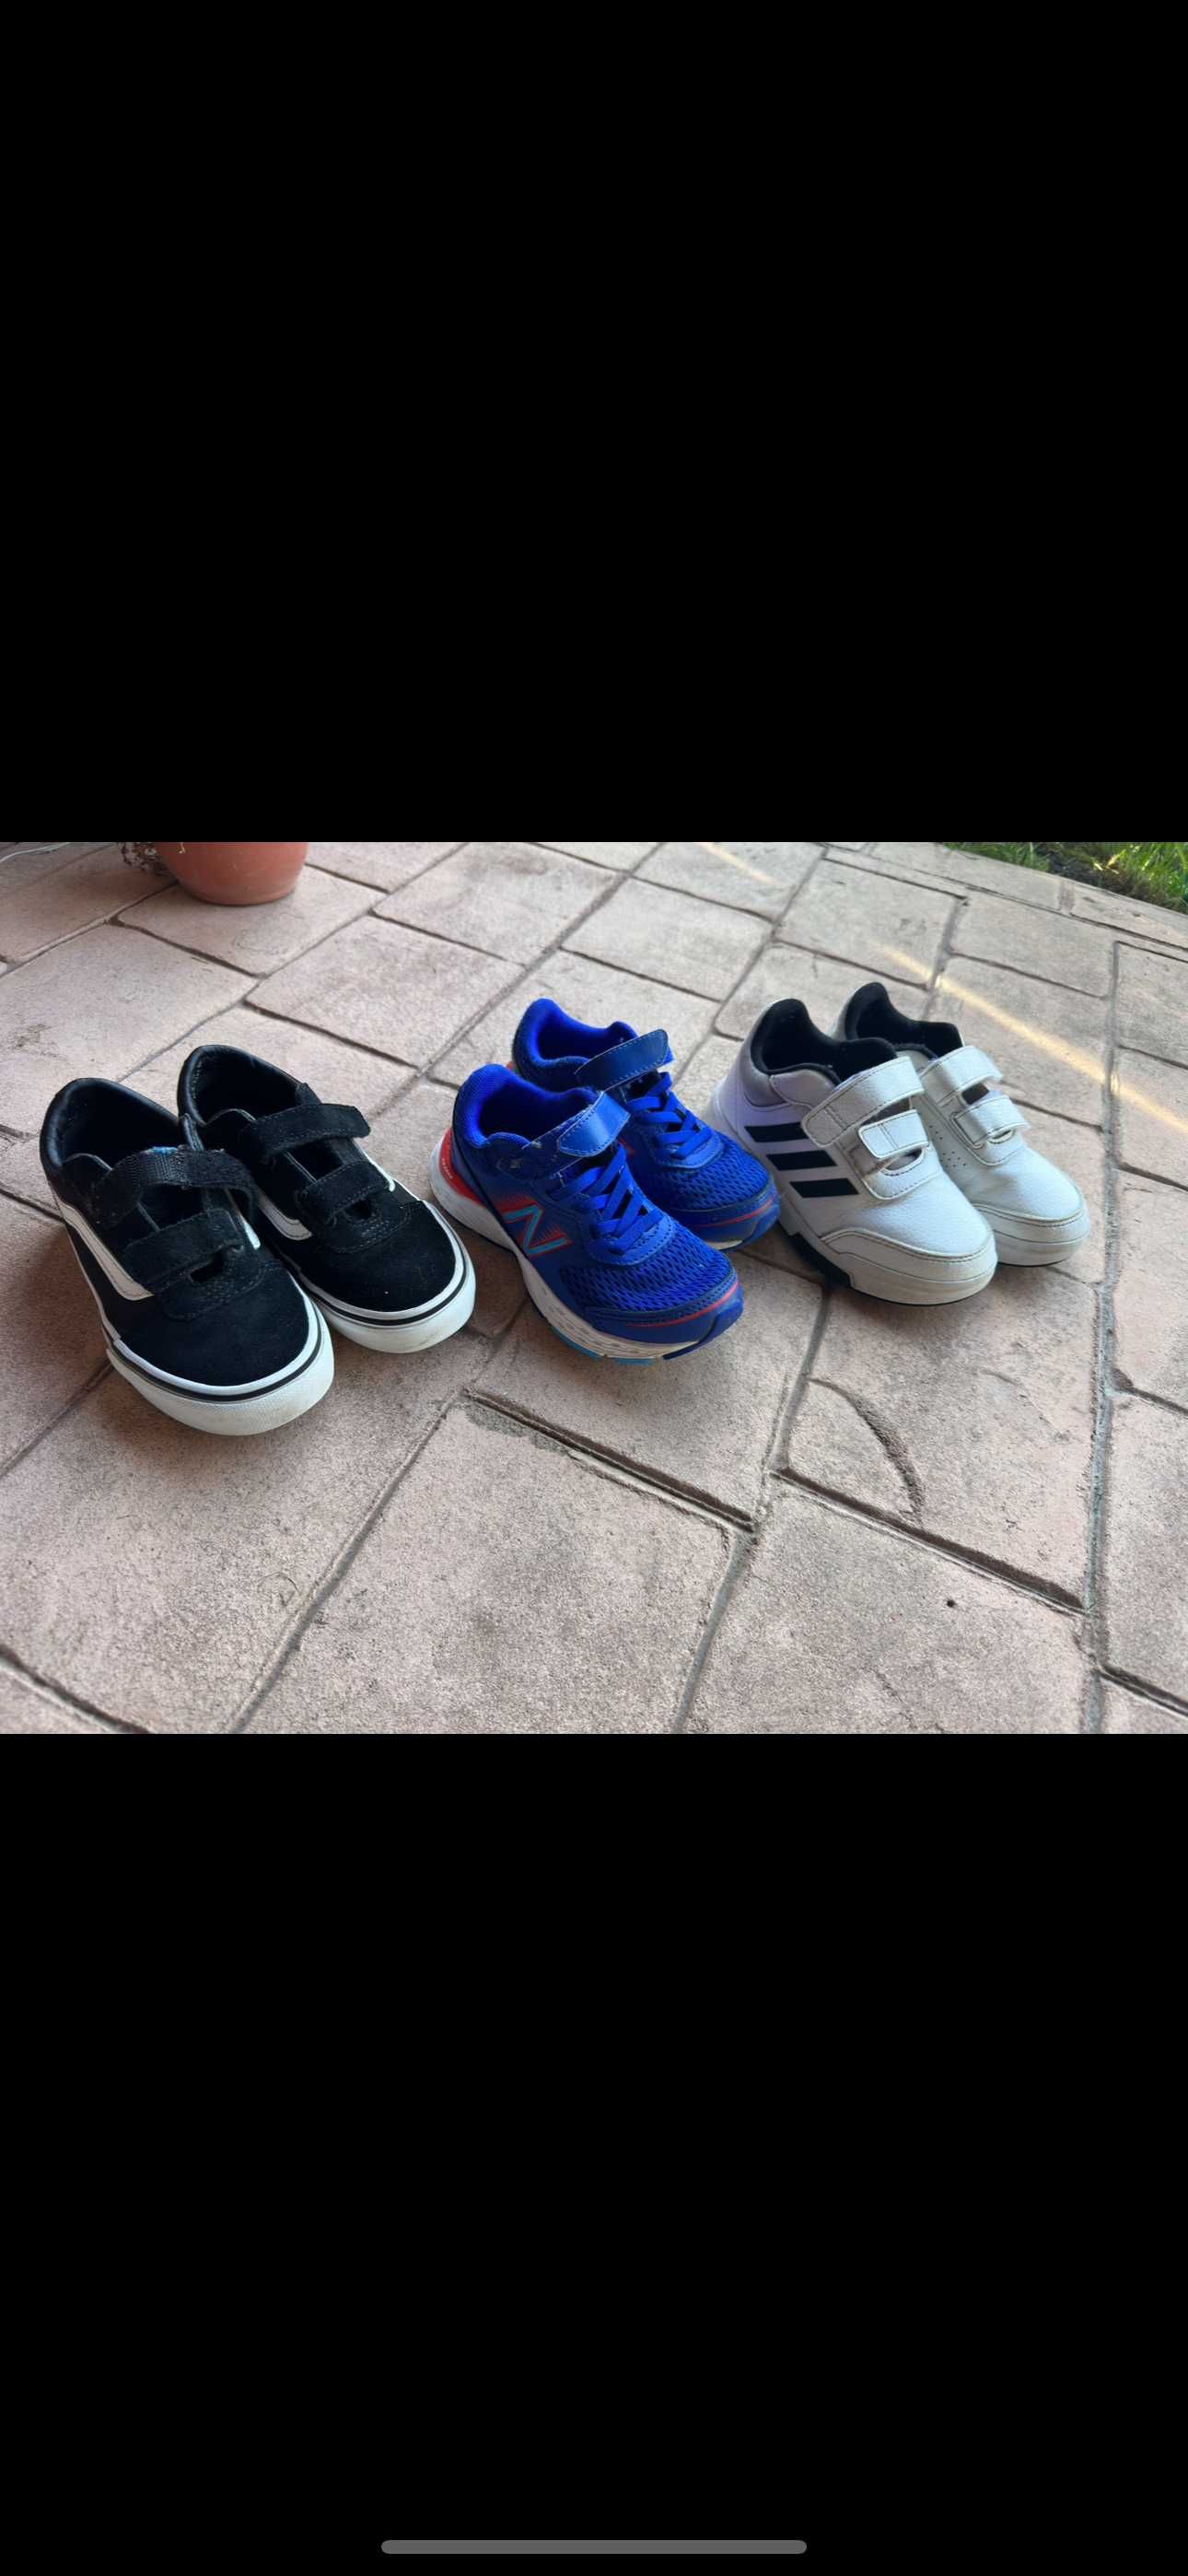 vans/adidas/new balance: all shoes for 150 lei (27 size)